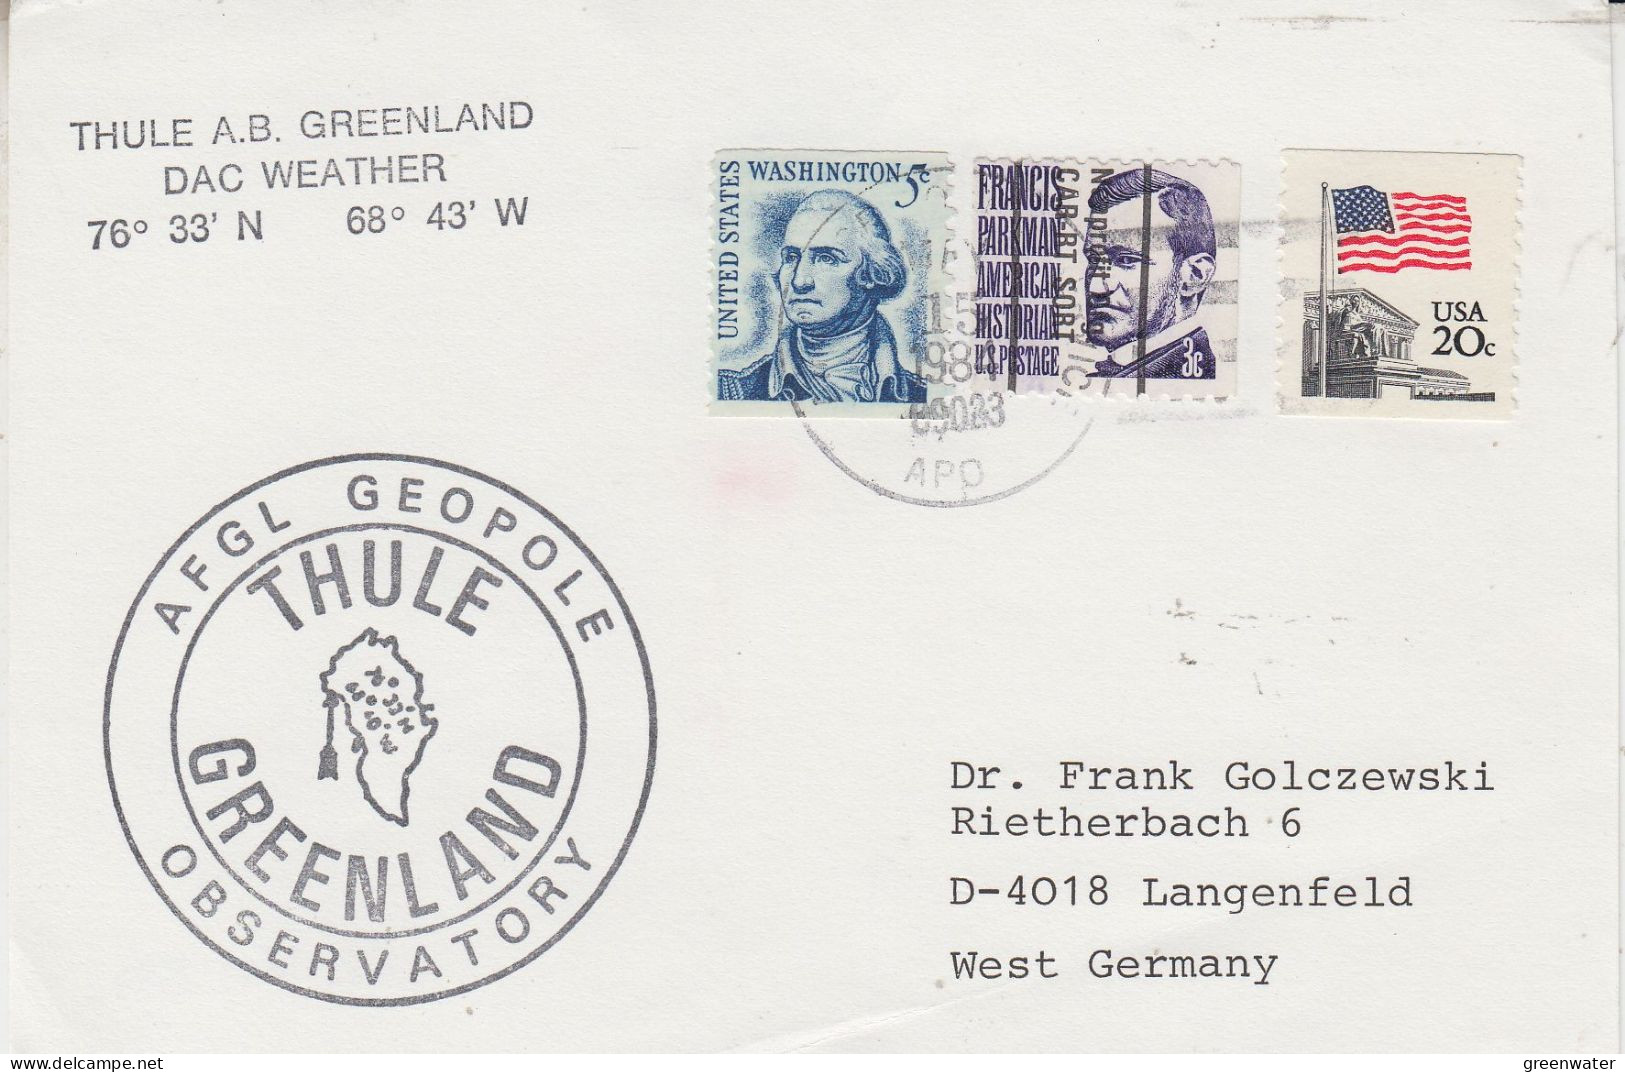 USA AFGL Geopole Observatory Thule Greenland Ca MAY 15 1984 (SD200) - Research Programs